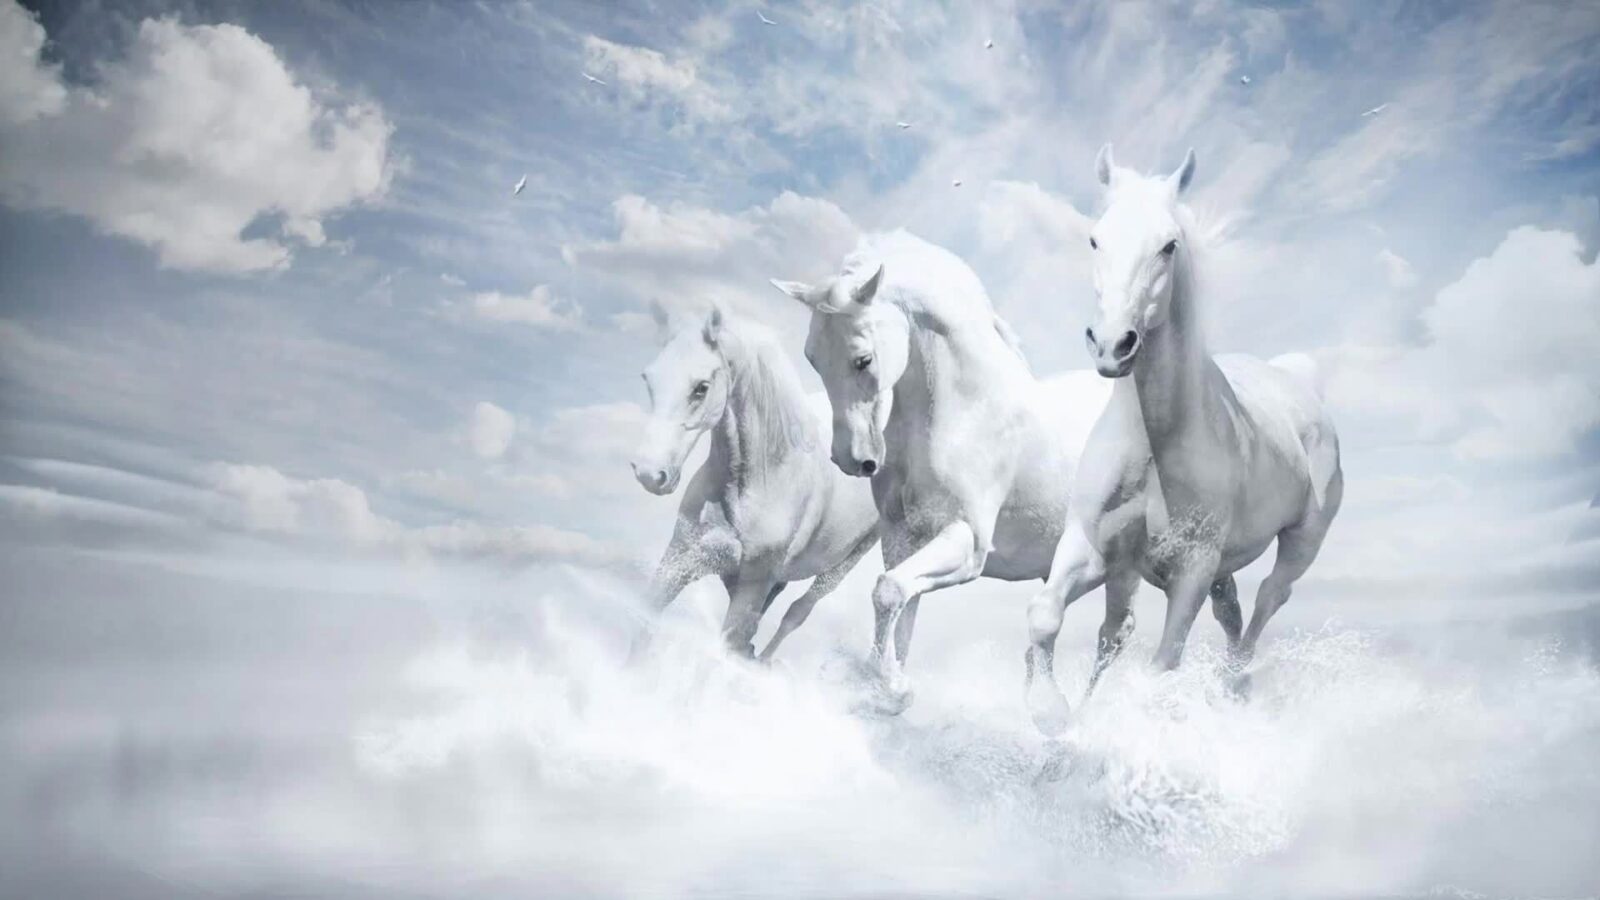 LiveWallpapers4Free.com | Fantasy White Horses Clouds Art - Free Live Wallpaper